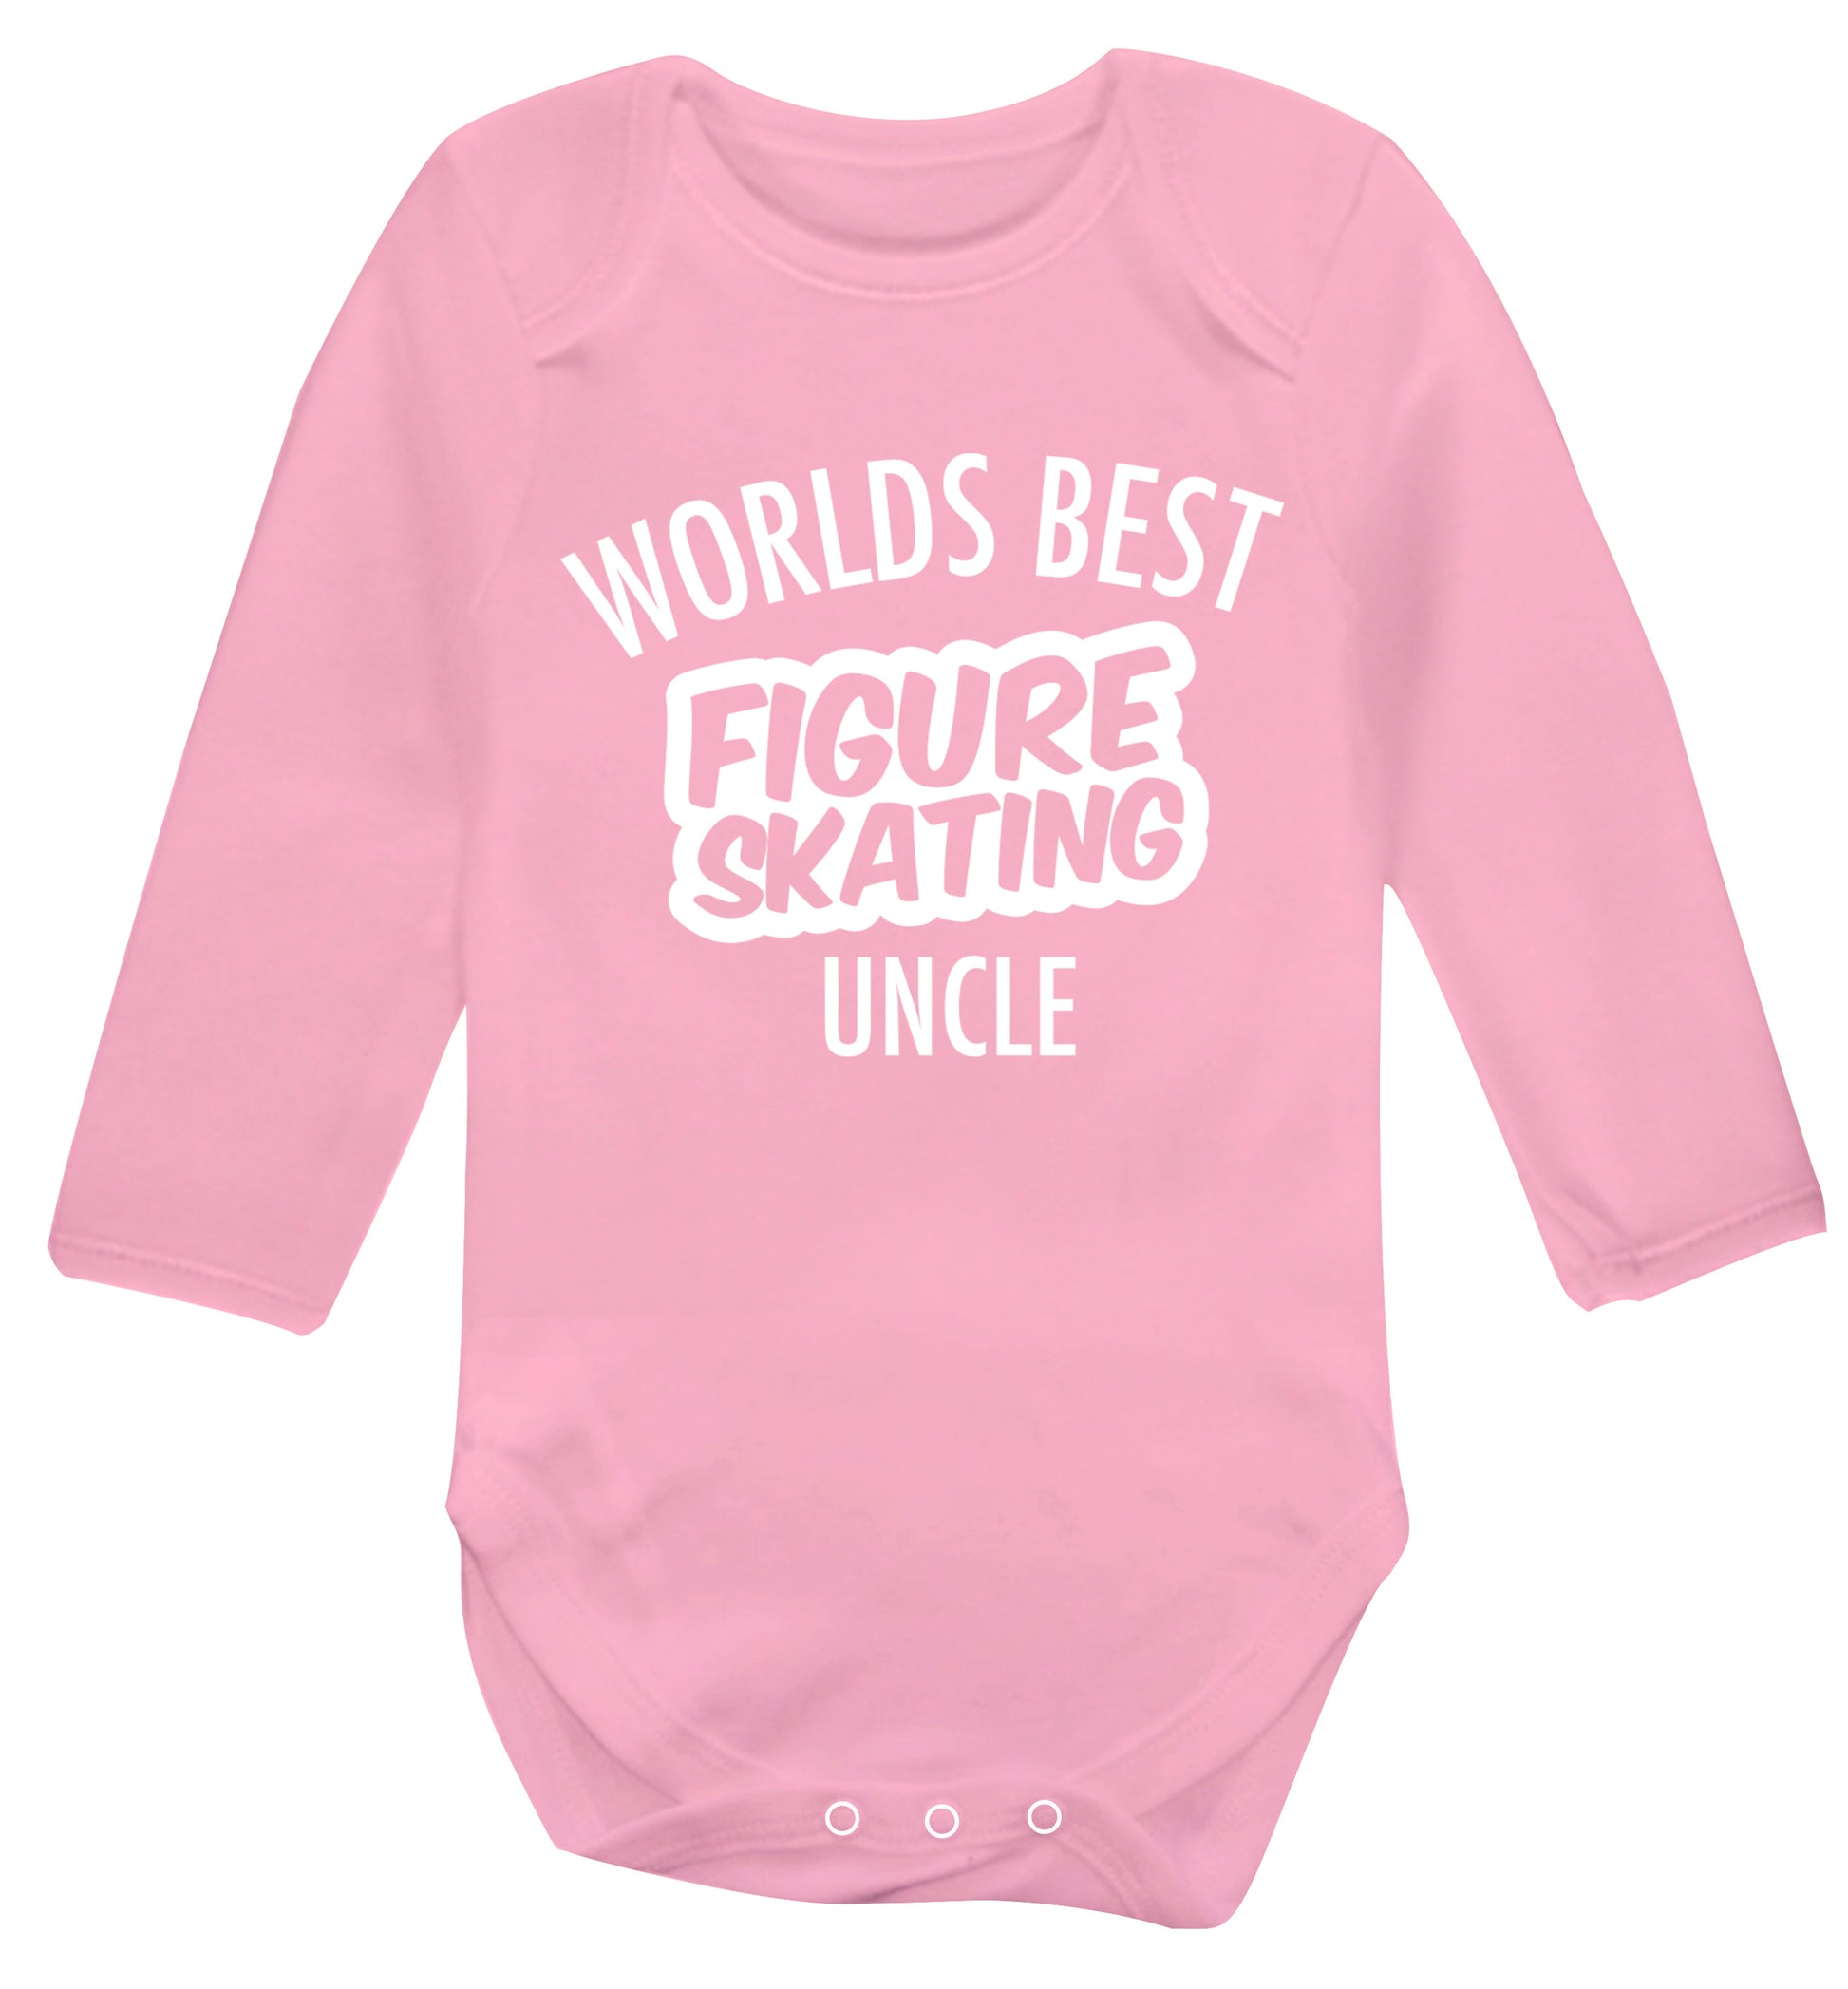 Worlds best figure skating uncle Baby Vest long sleeved pale pink 6-12 months